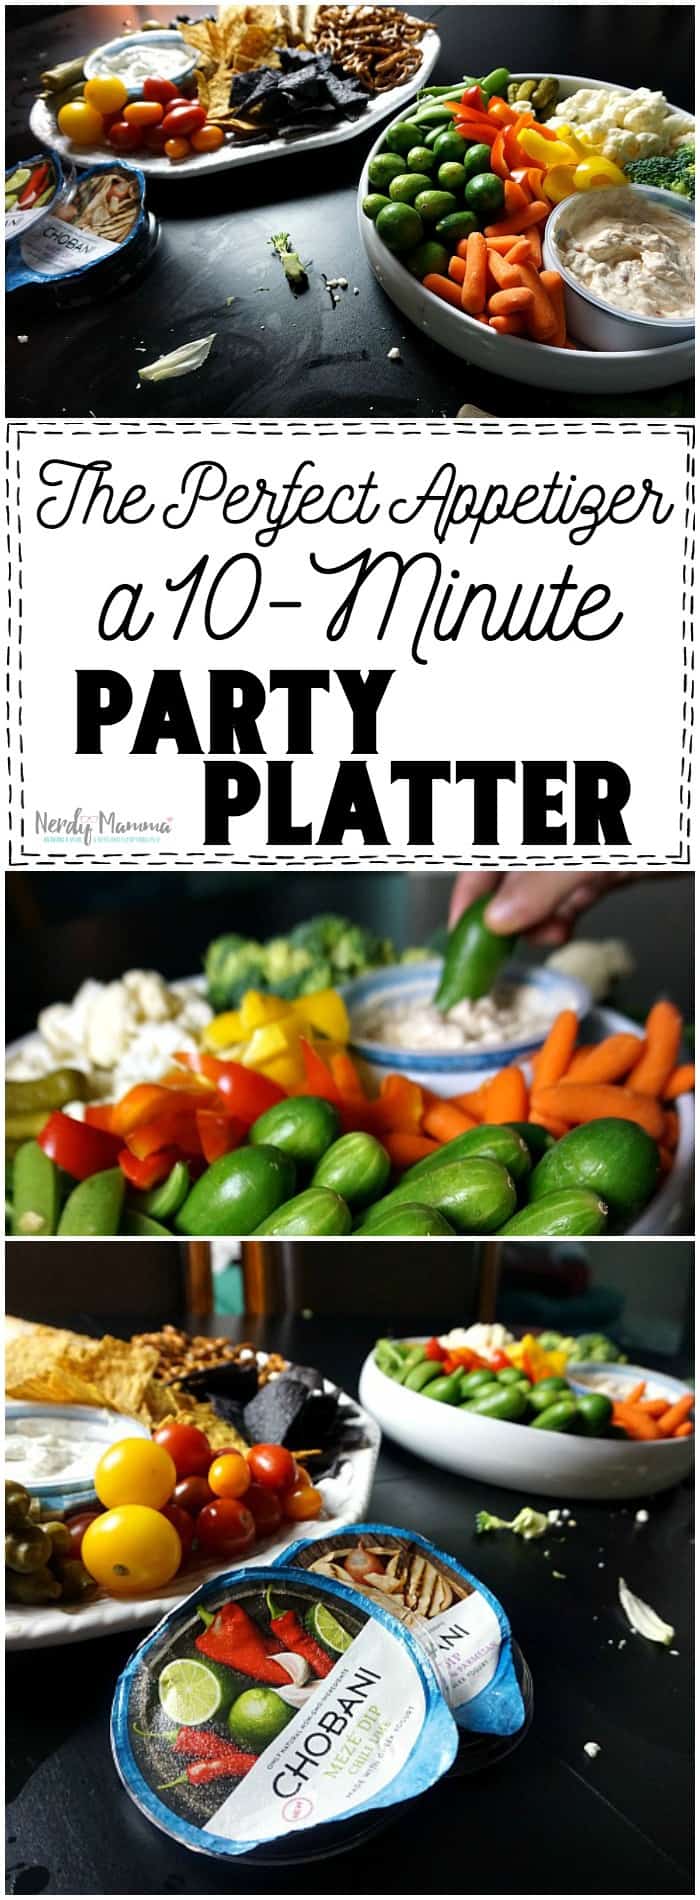 I love this easy and fast tutorial for how to make a party platter appetizer for a big group in just 10 mintues! So simple!